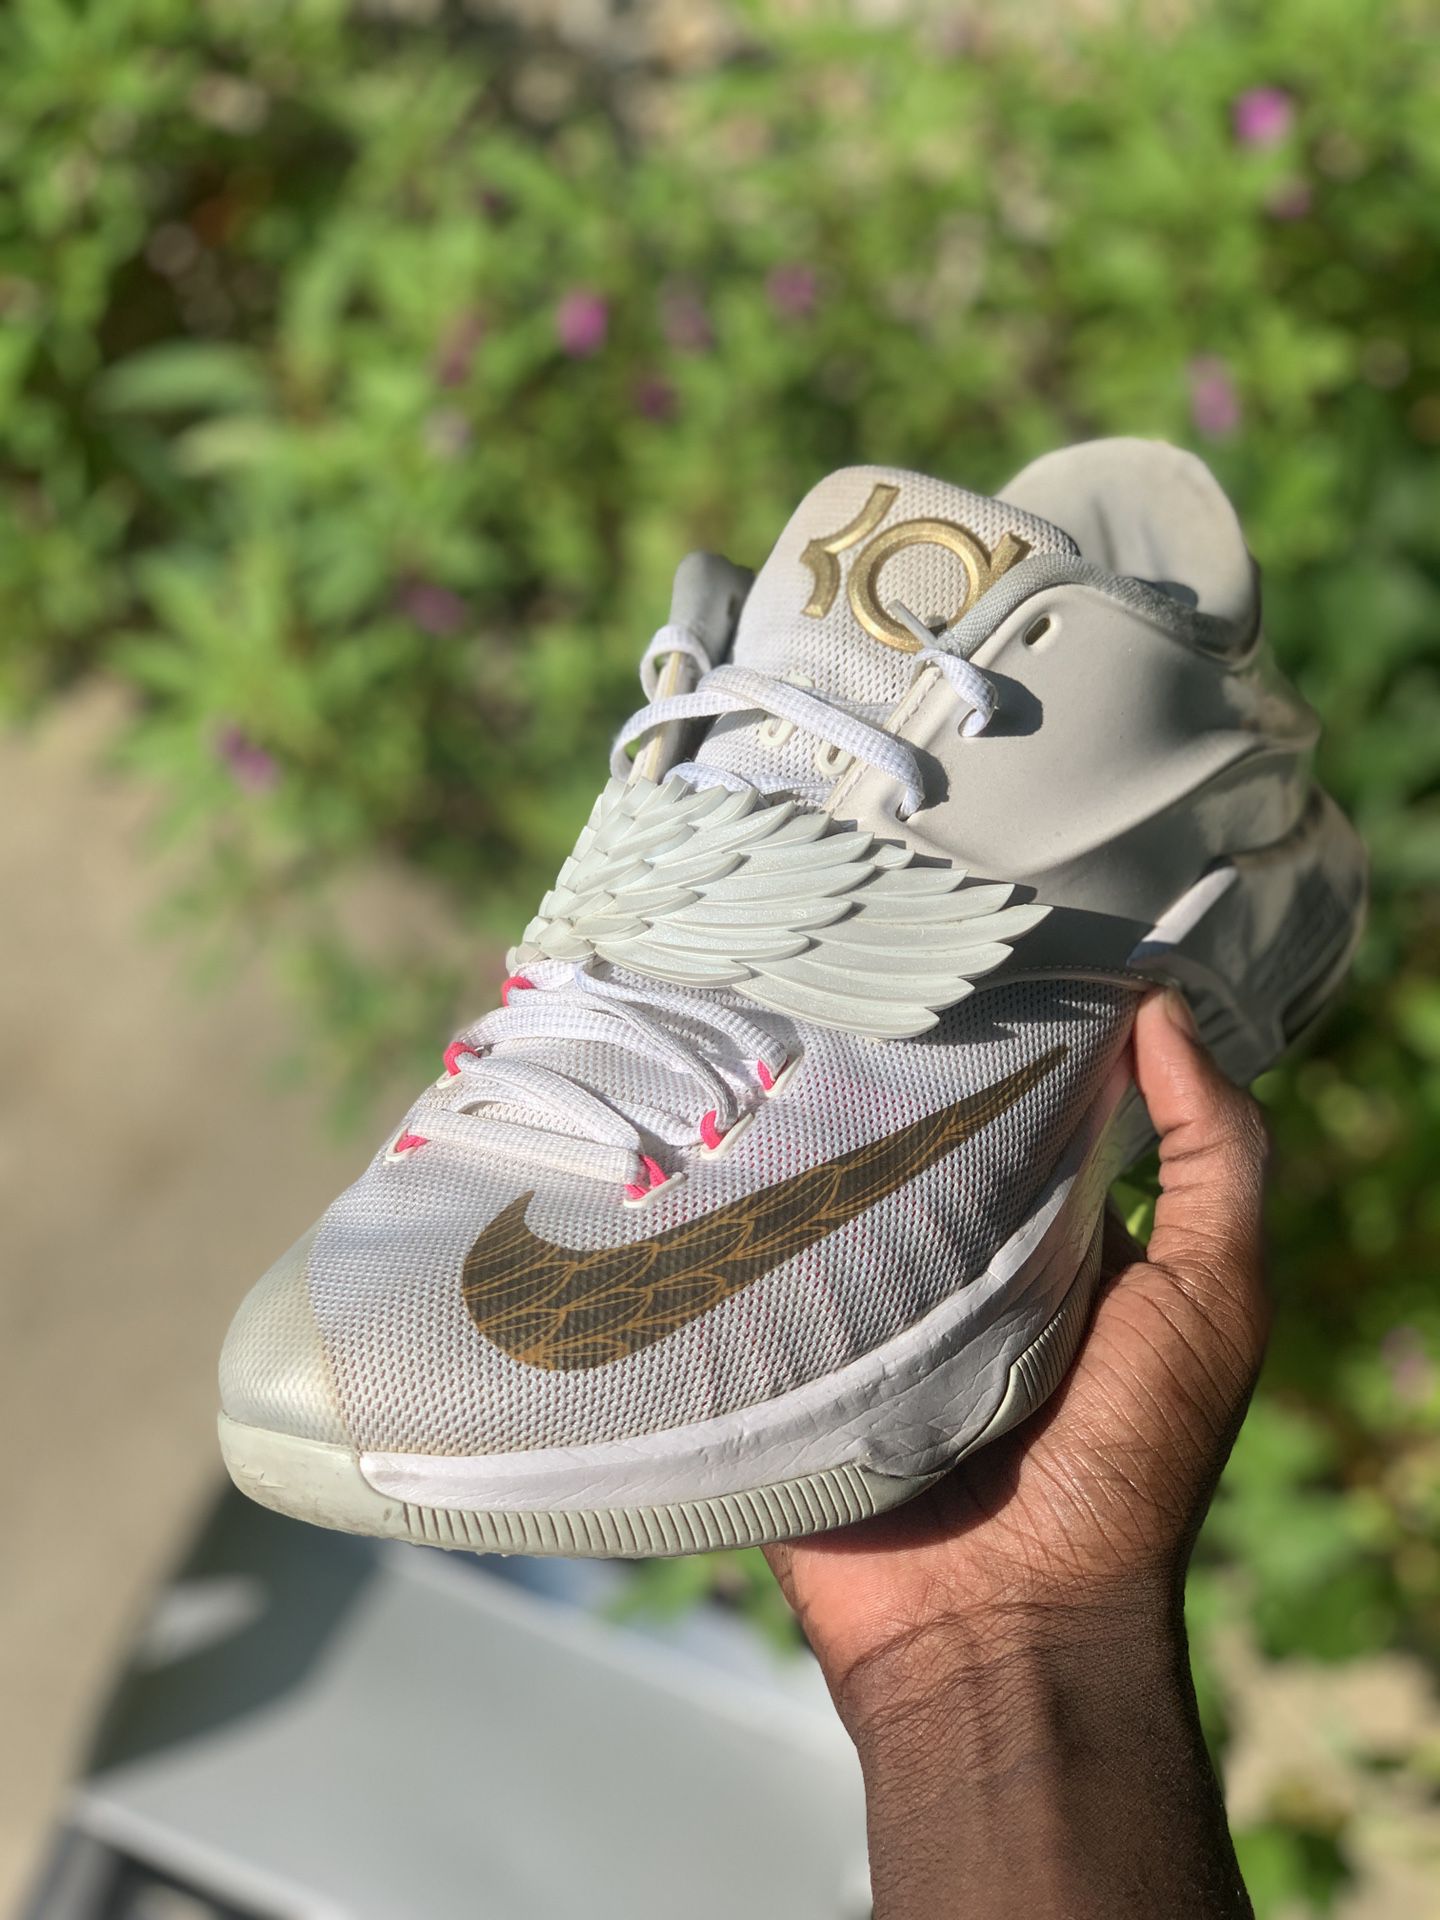 Aunt Pearl kd 7